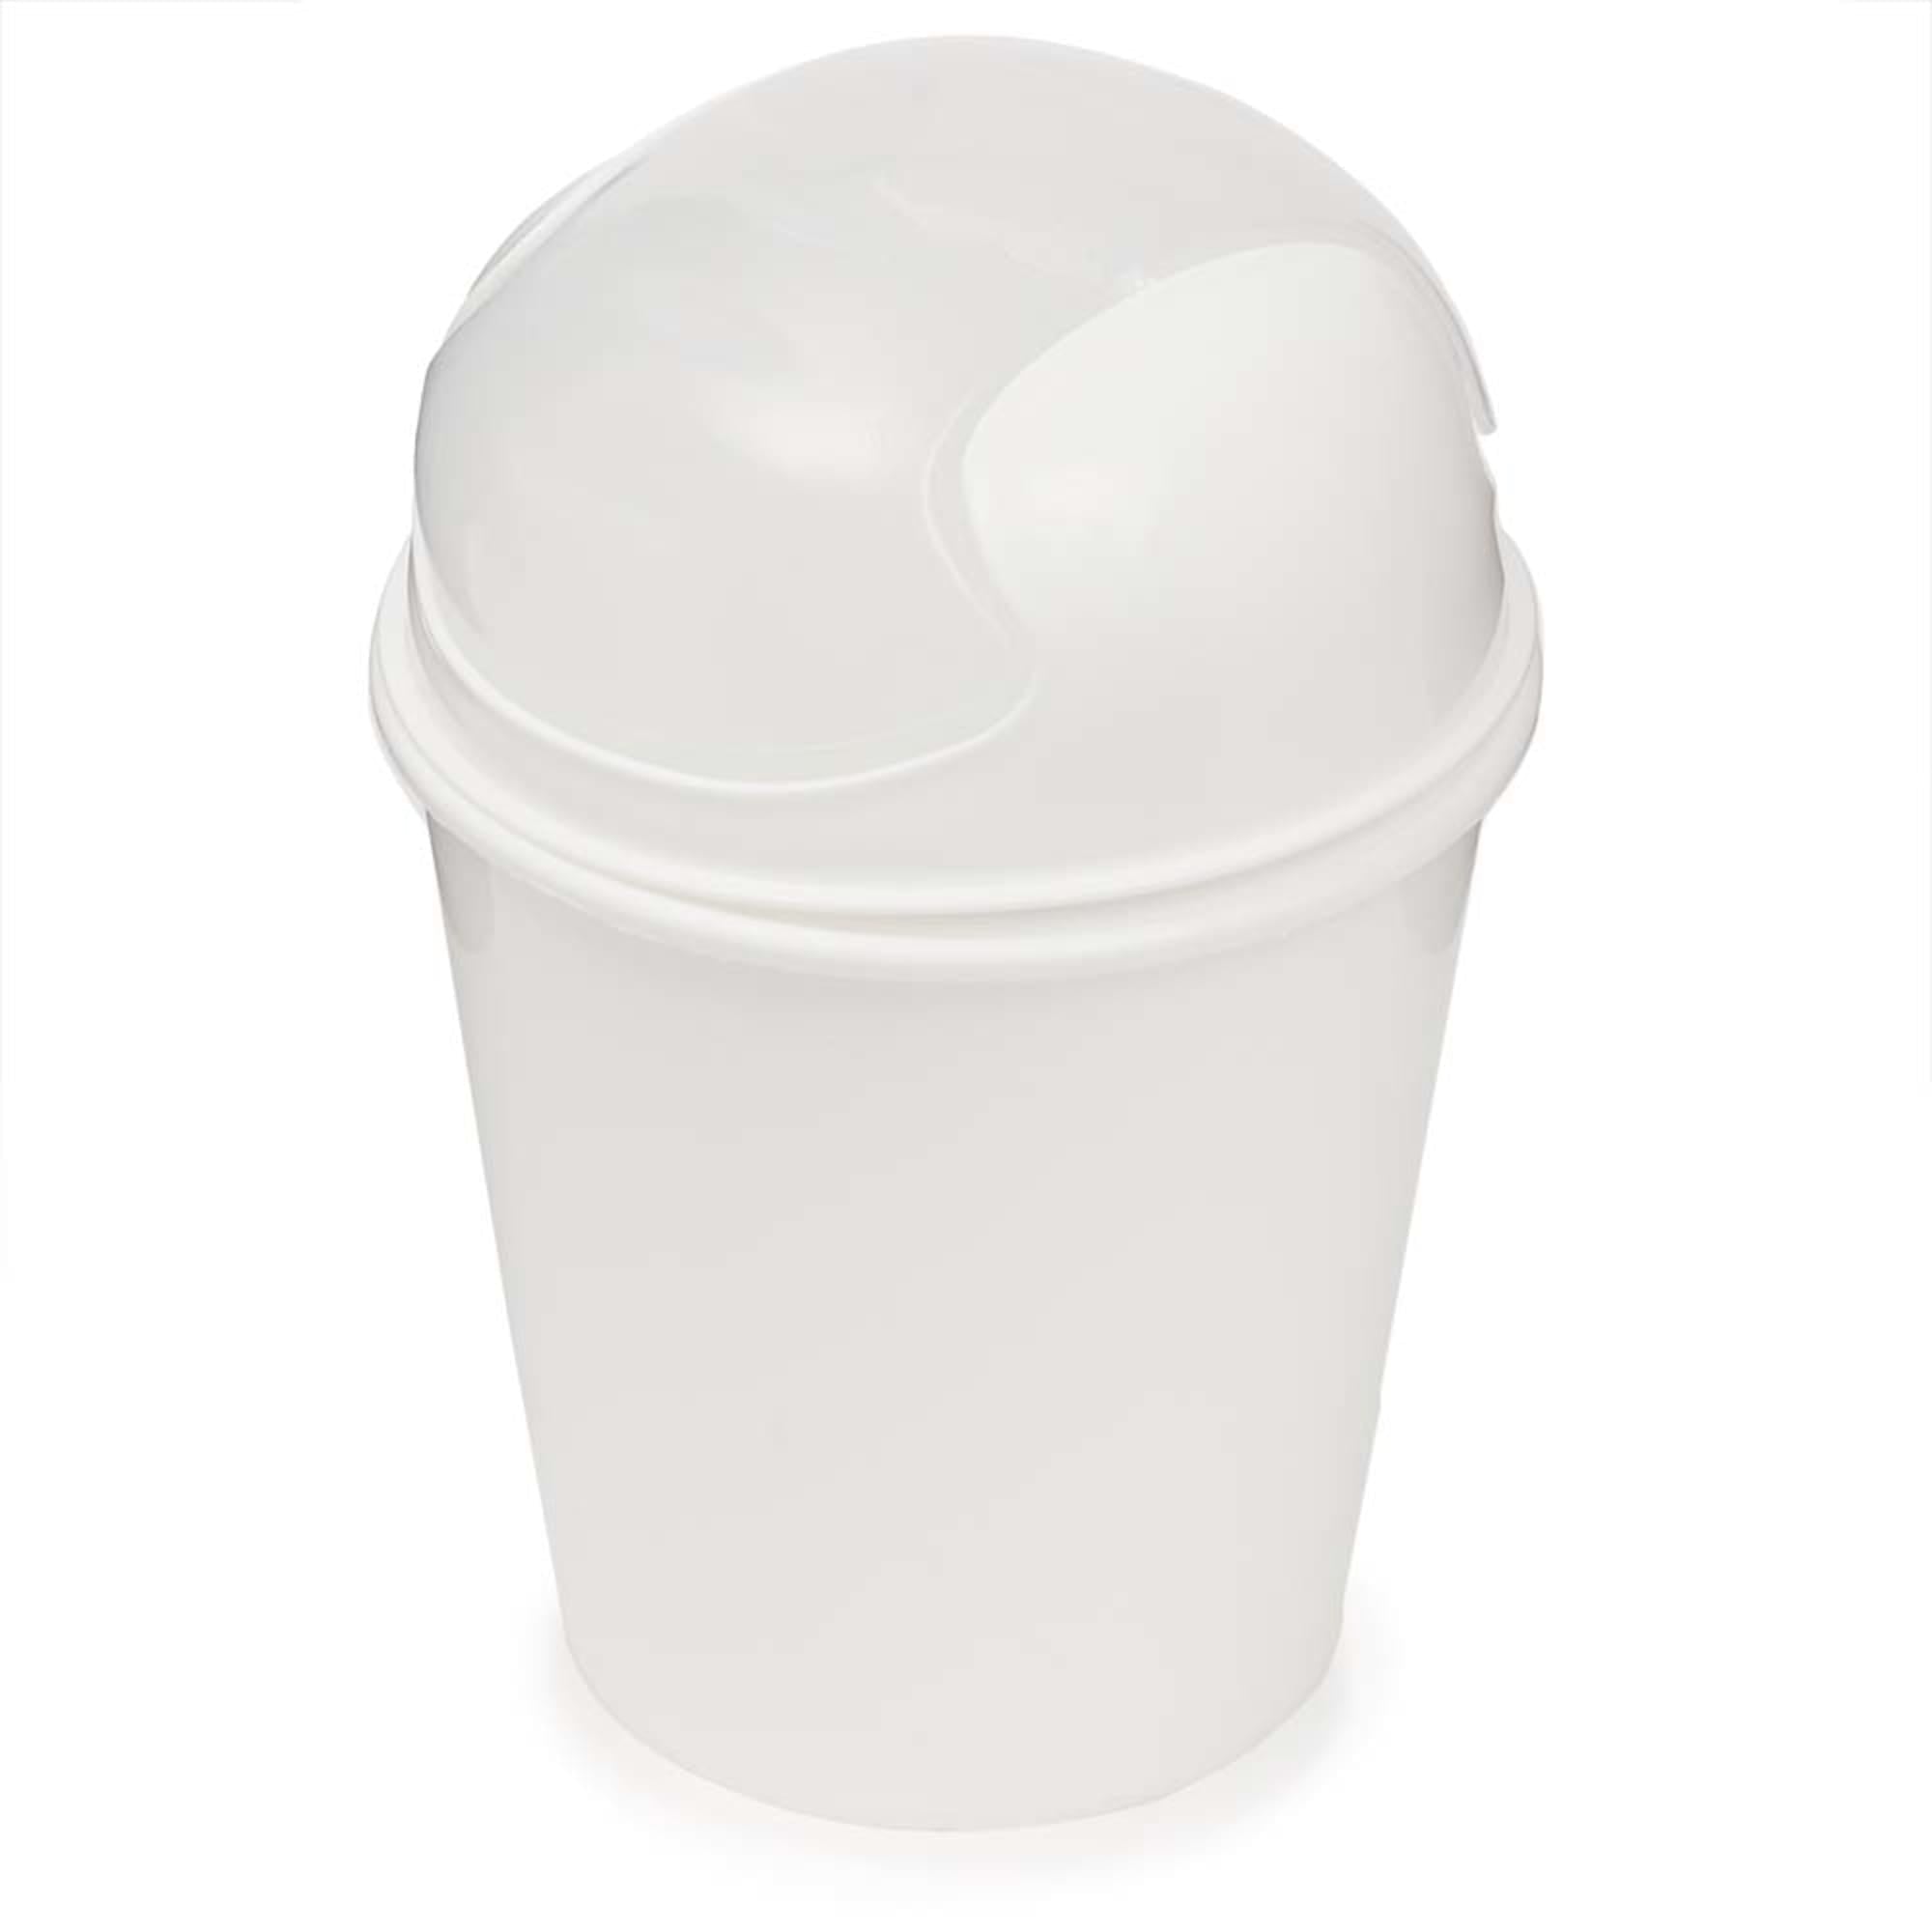 Home Basics 3 Liter Clear Swing Top Waste Bin with Removable Lid, White  $4 EACH, CASE PACK OF 6